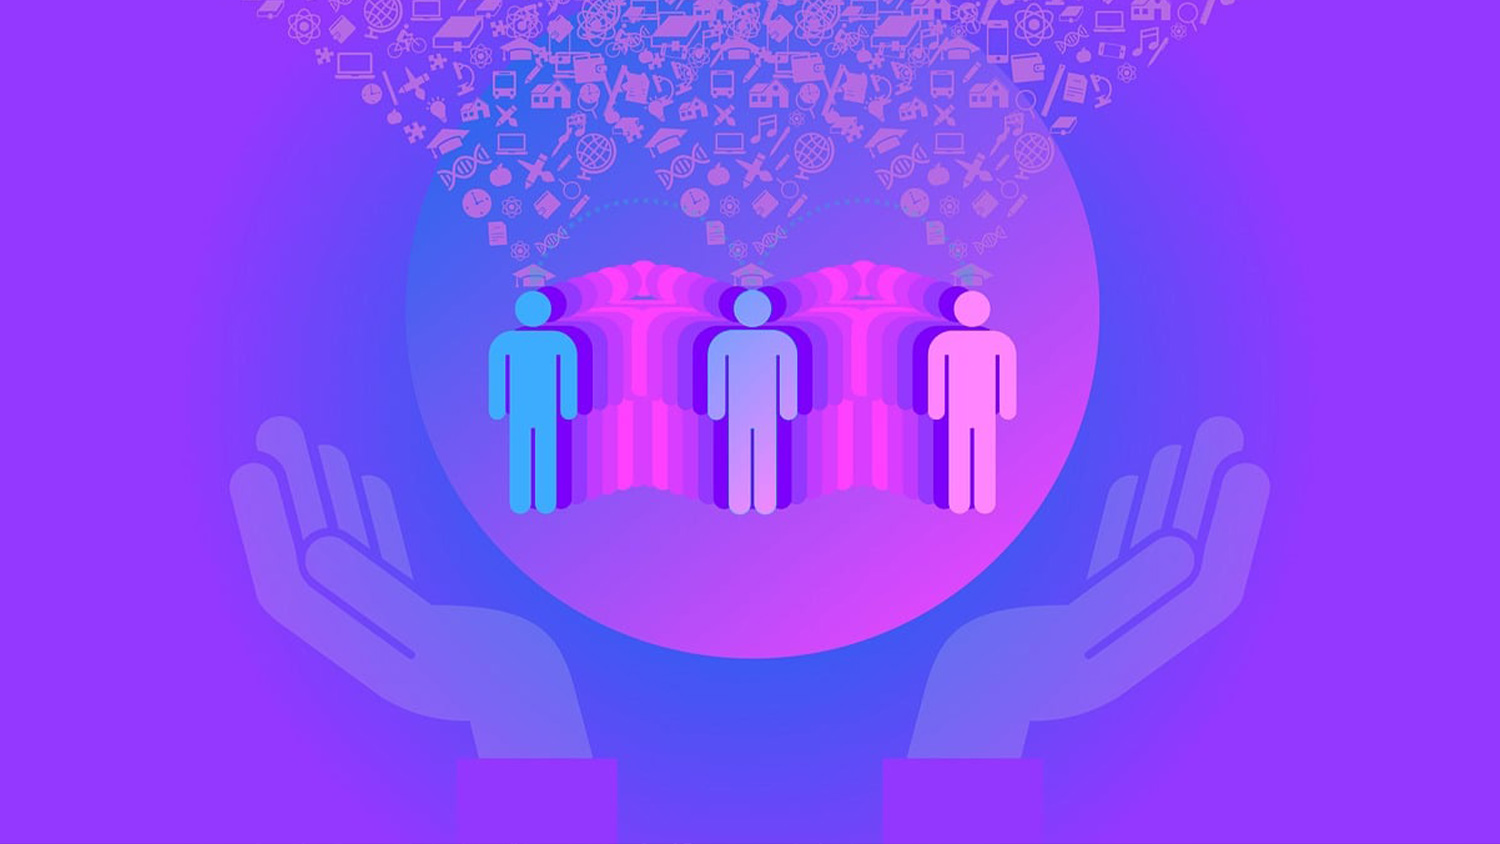 digital illustration of three male bathroom stick figures with many icons funneling into their head, the figures are contained in a circle floating above open computer cursor hands 